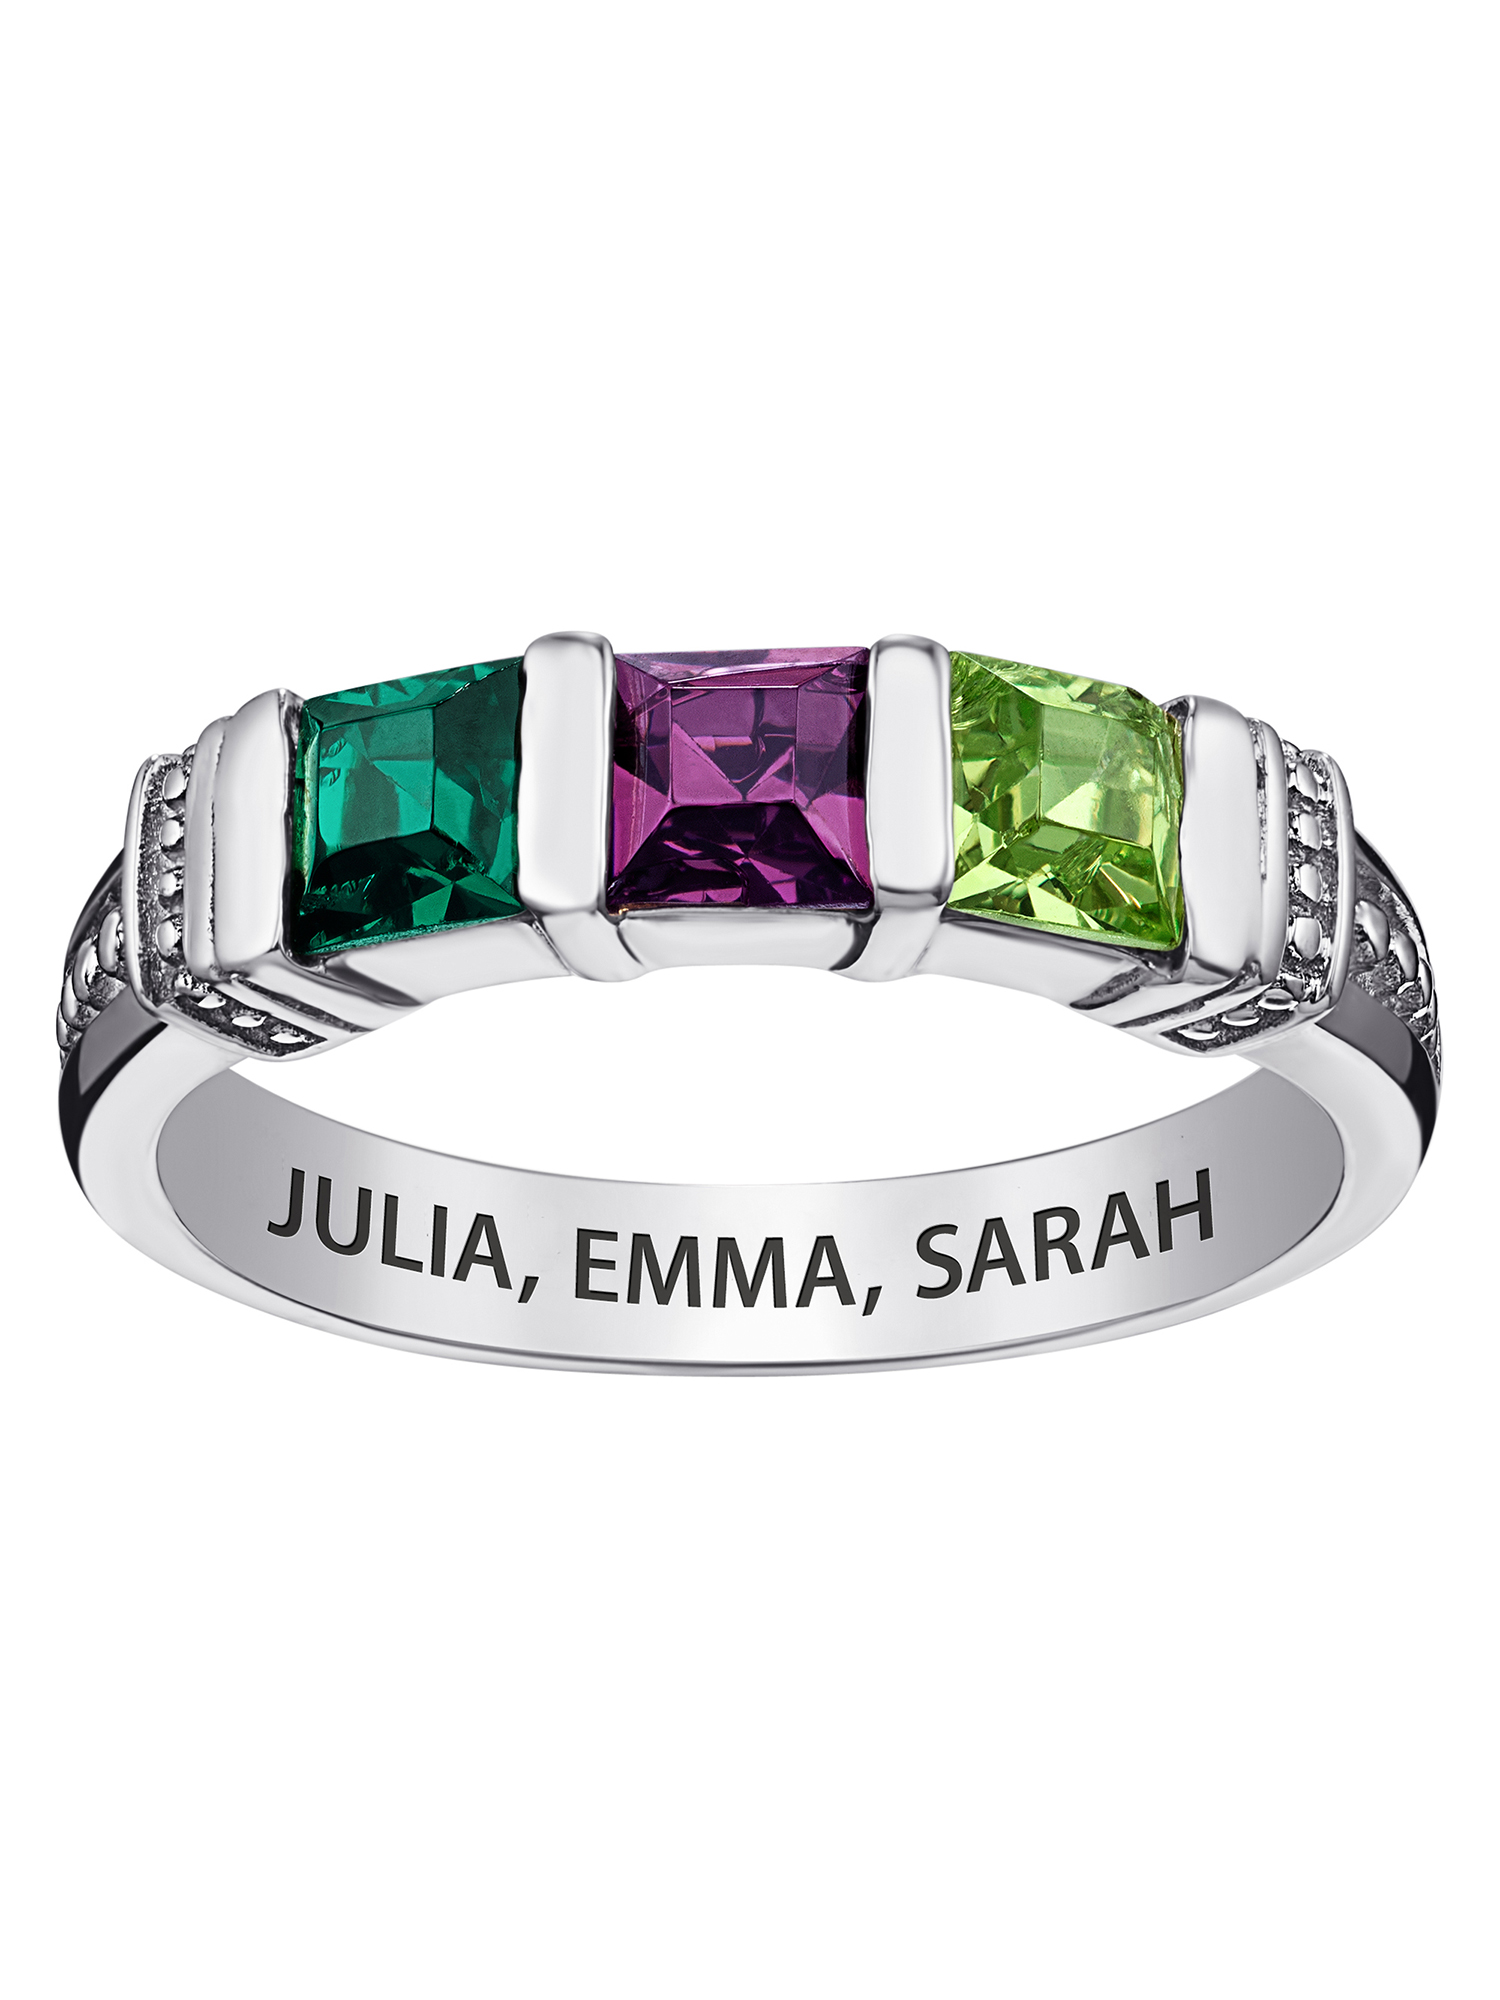 Family Jewelry Personalized Planet Mother's Sterling Silver Square Birthstone Ring 2-5 Stones ,Women's - image 2 of 2